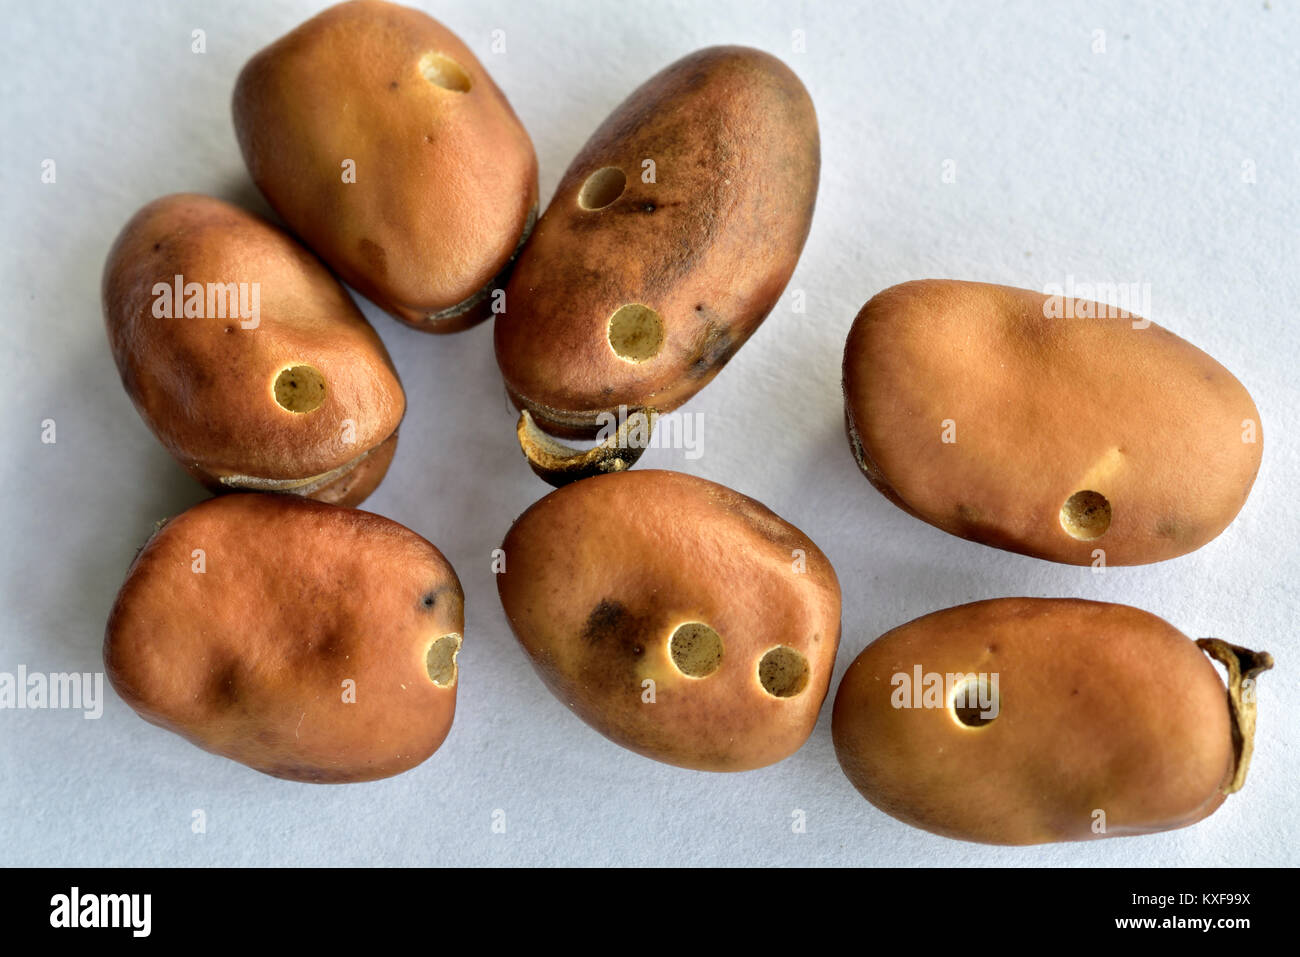 Dried broad beans or fava bean, a major food staple, showing holes produced by the bean seed beetle Stock Photo